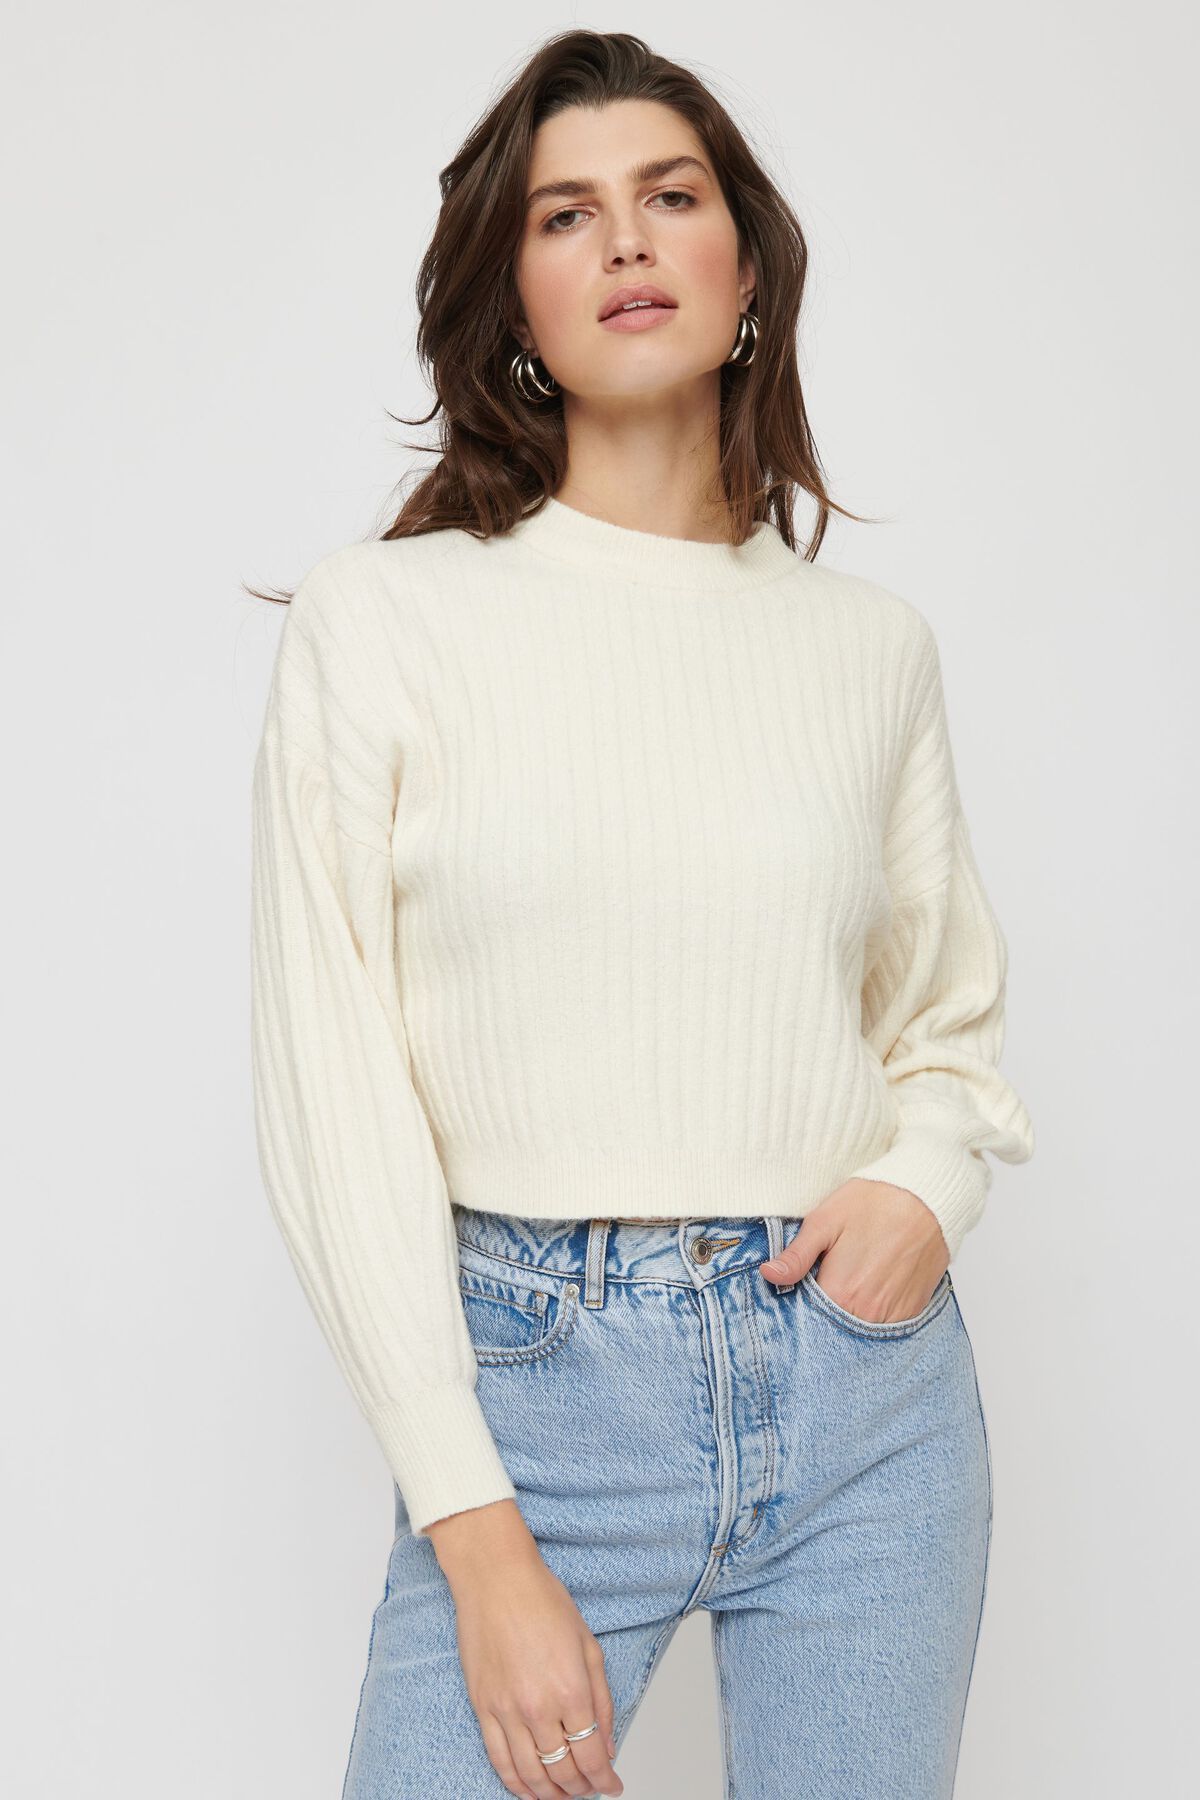 Dynamite Ribbed Crew Neck Sweater. 3